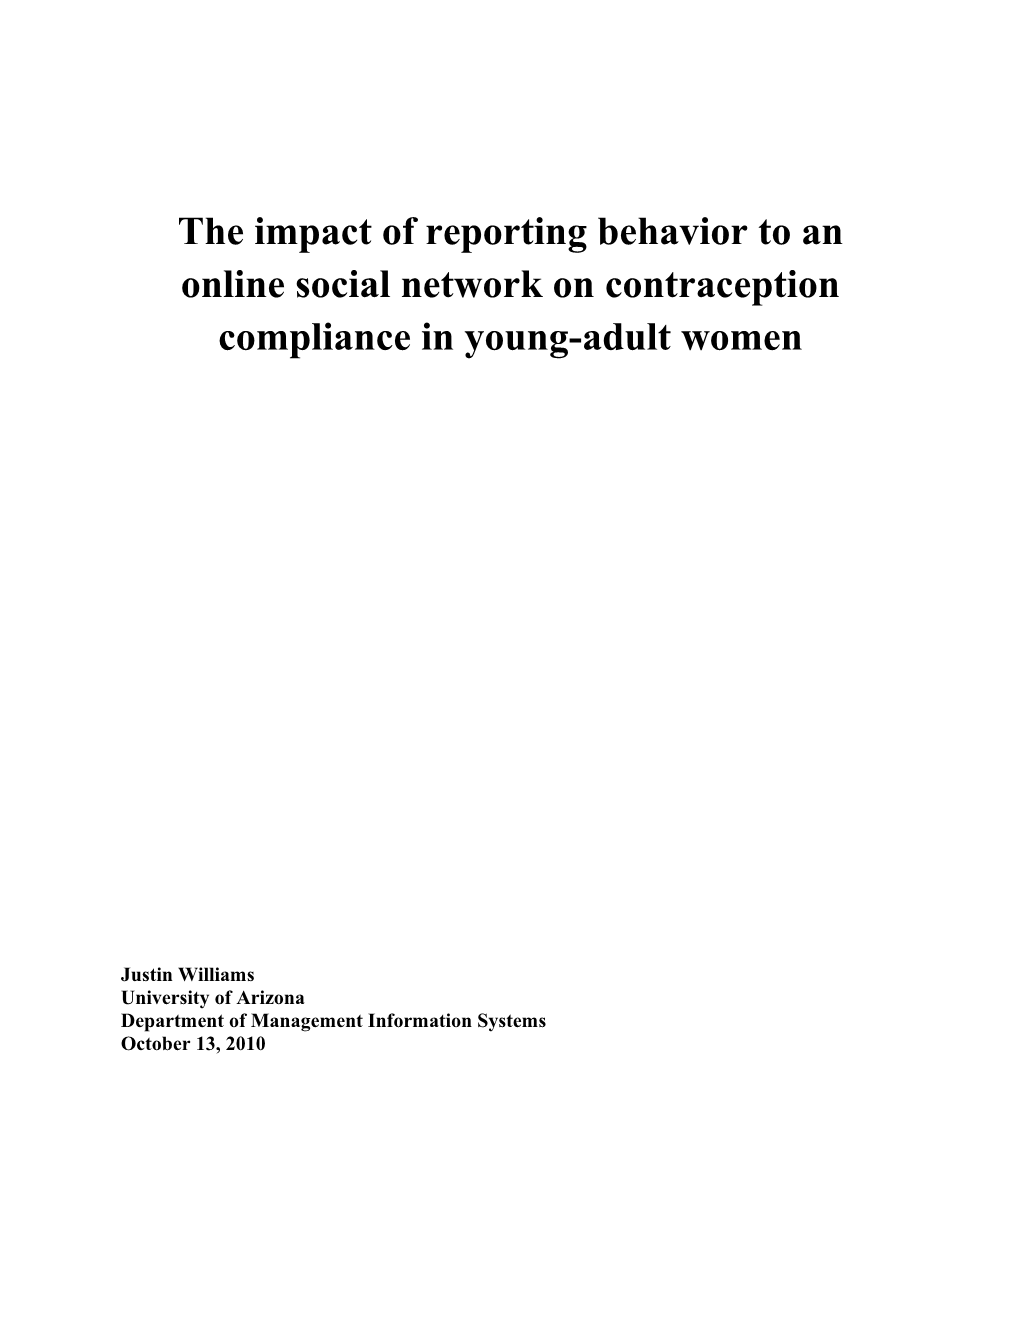 The Impact of Reporting Behavior to an Online Social Network on Contraception Compliance